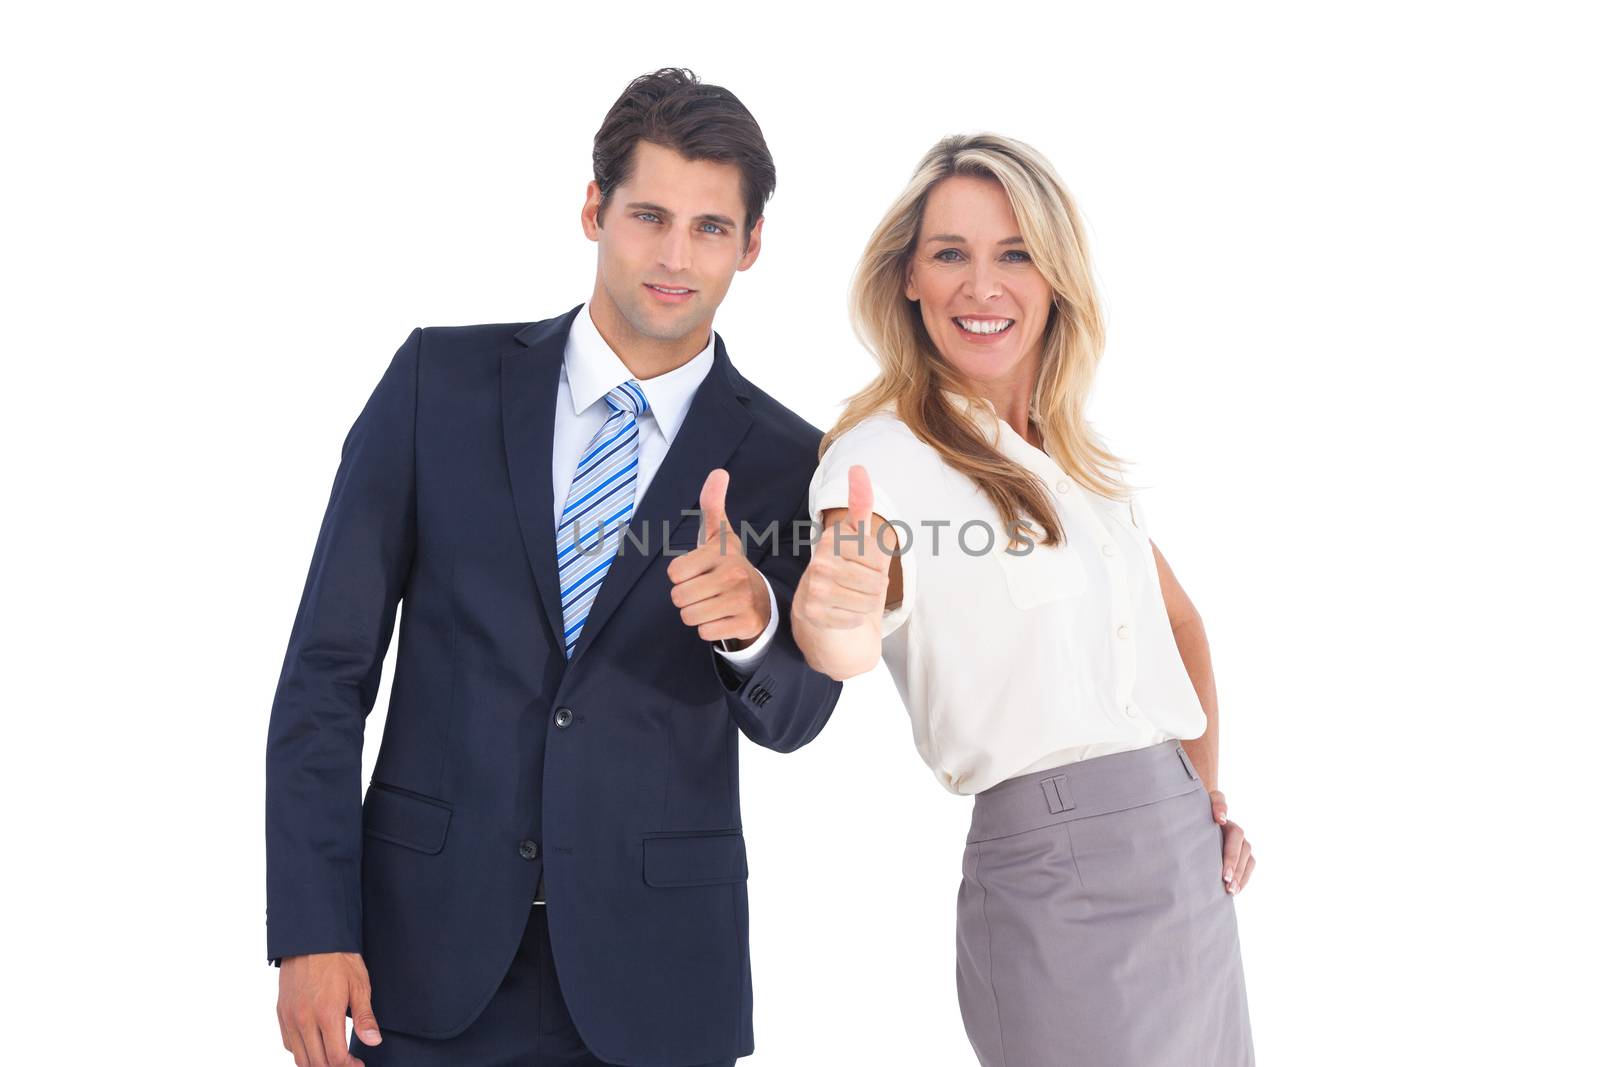 Business people smiling with thumbs up